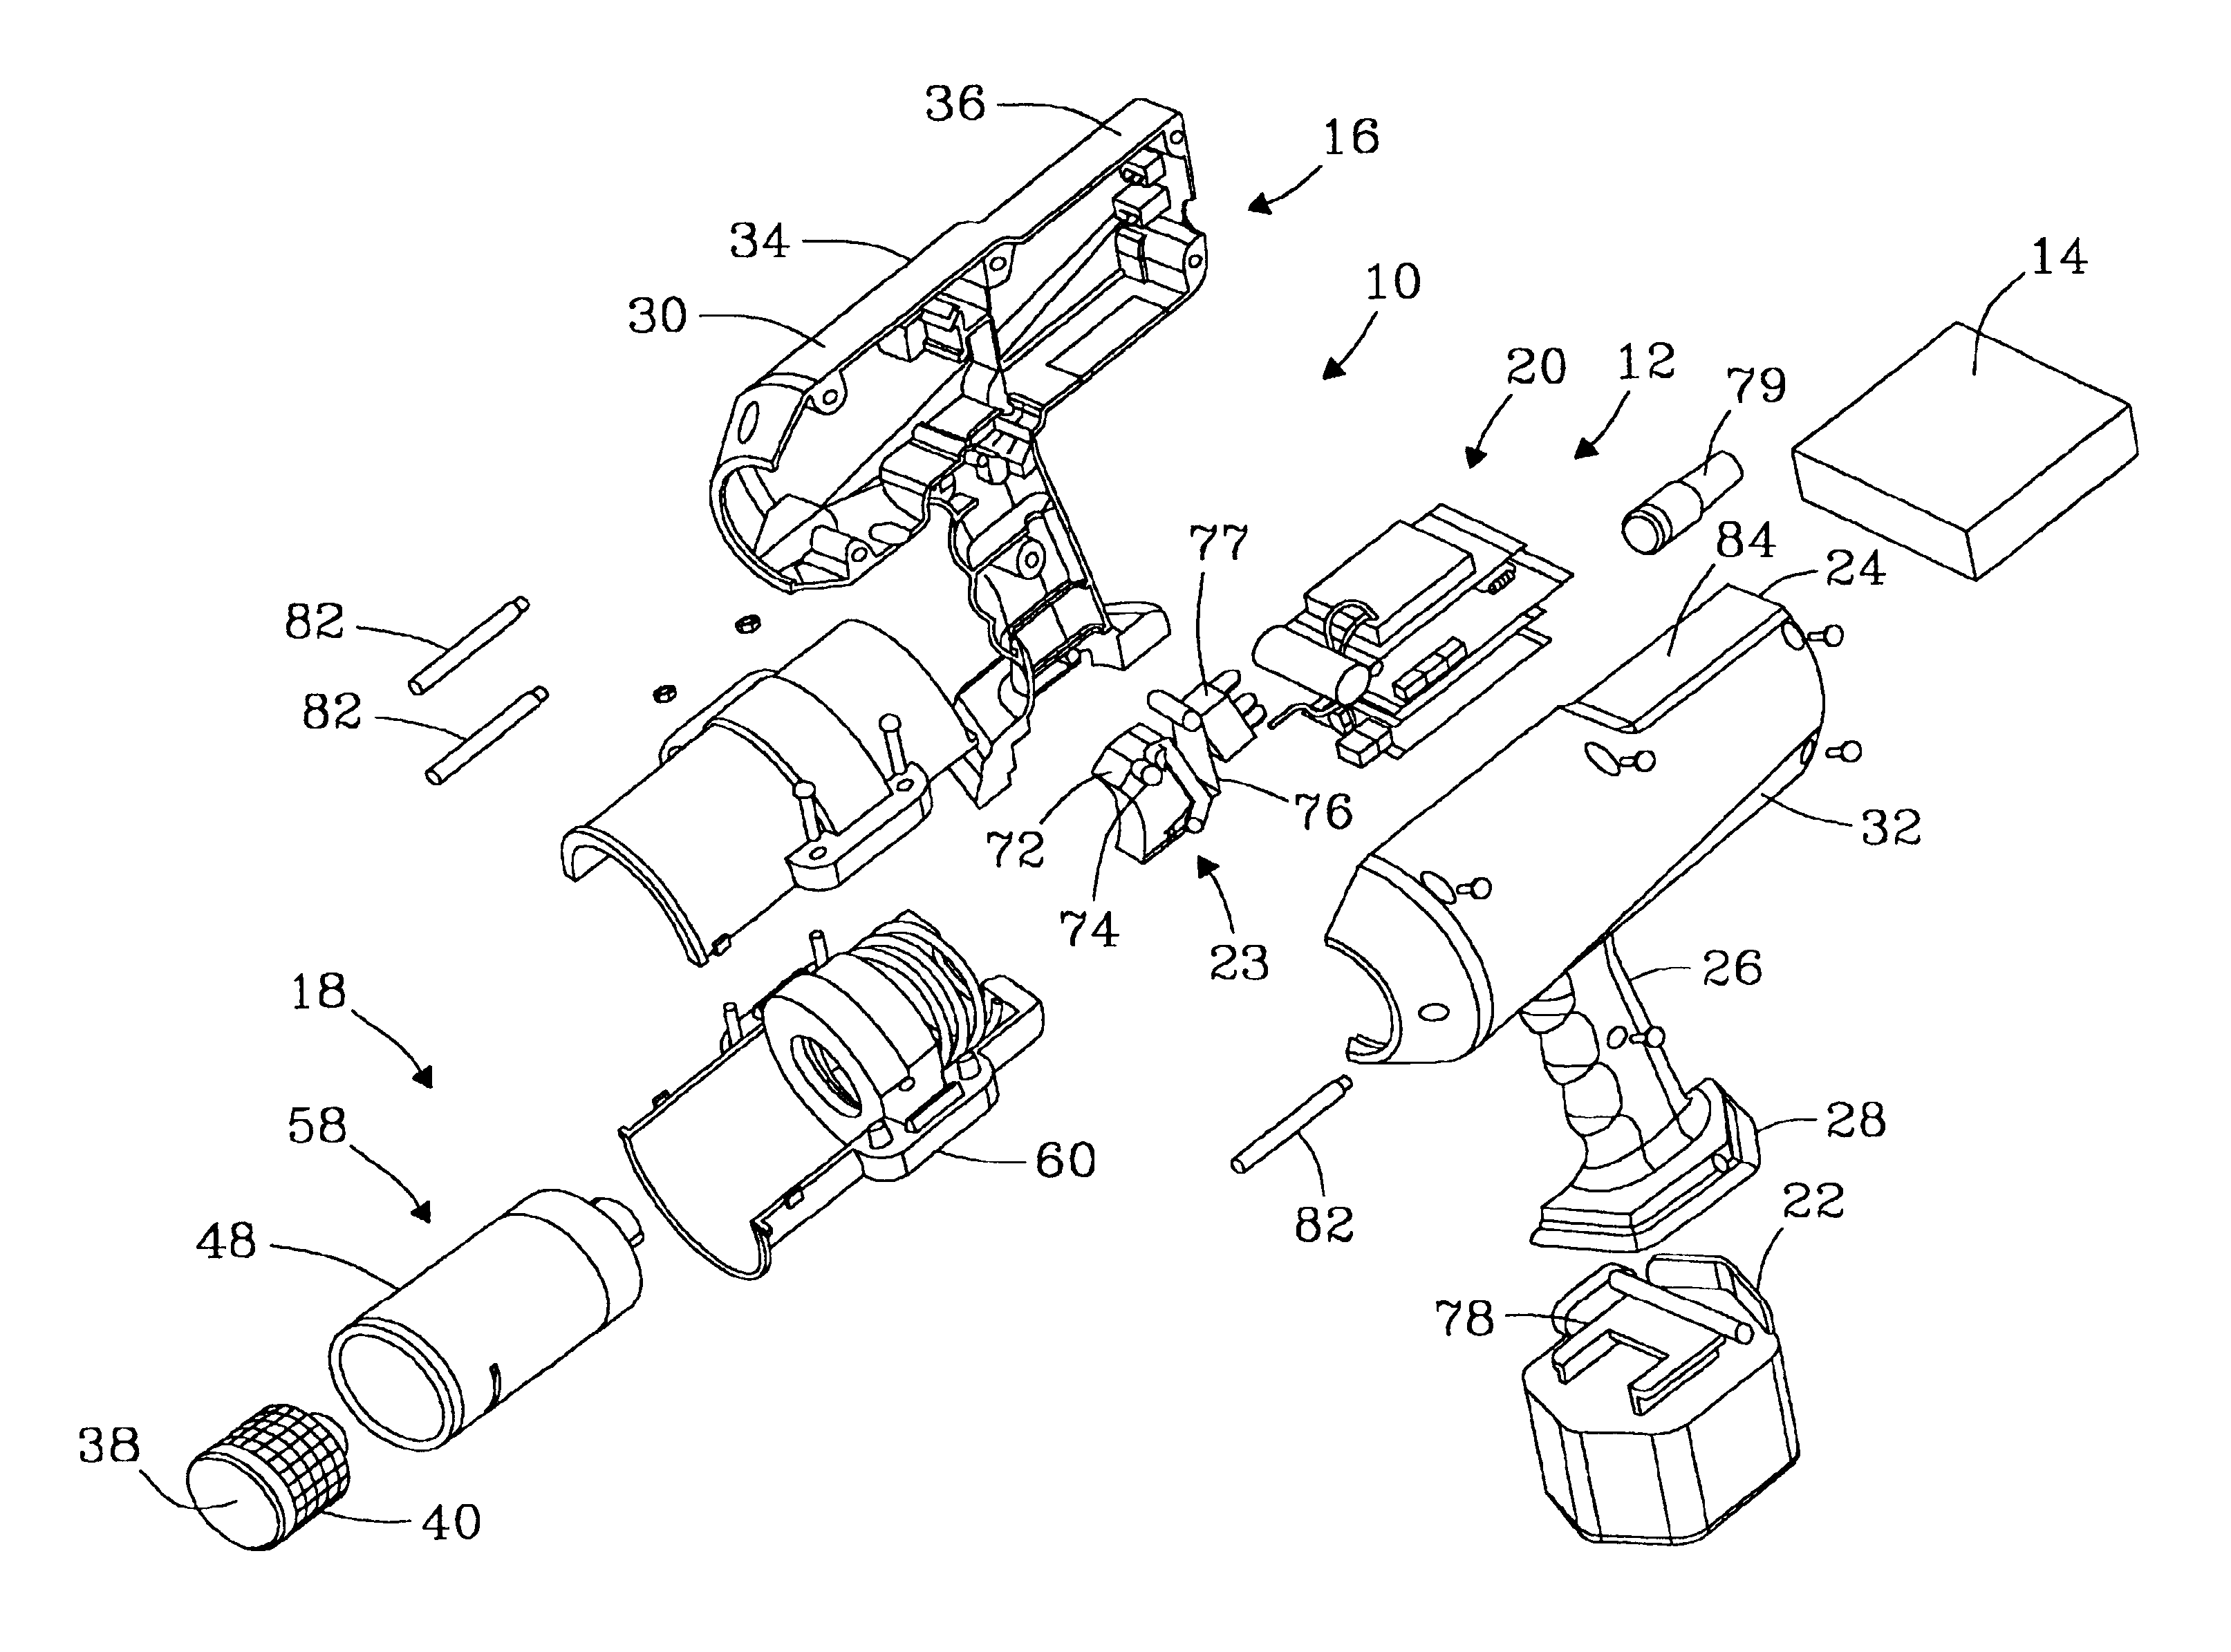 Acoustic inspection device